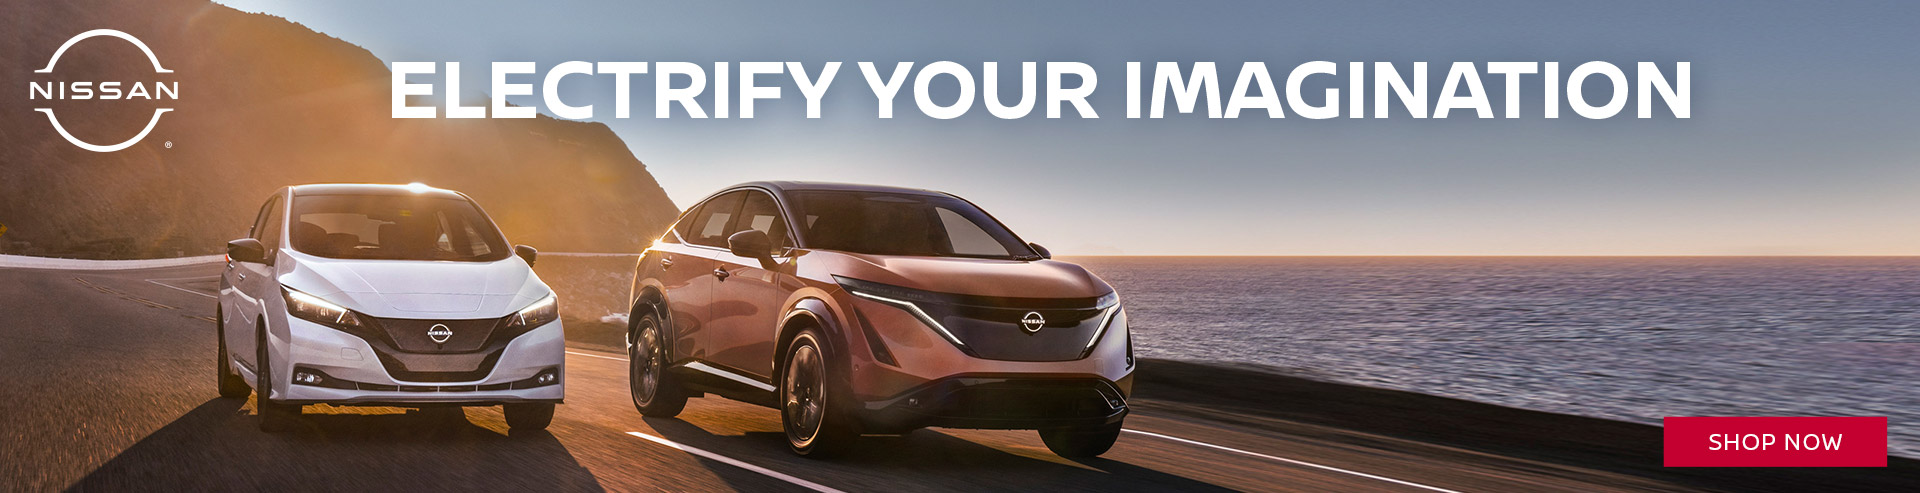 Electrify Your Imagination | Galesburg Nissan, IL